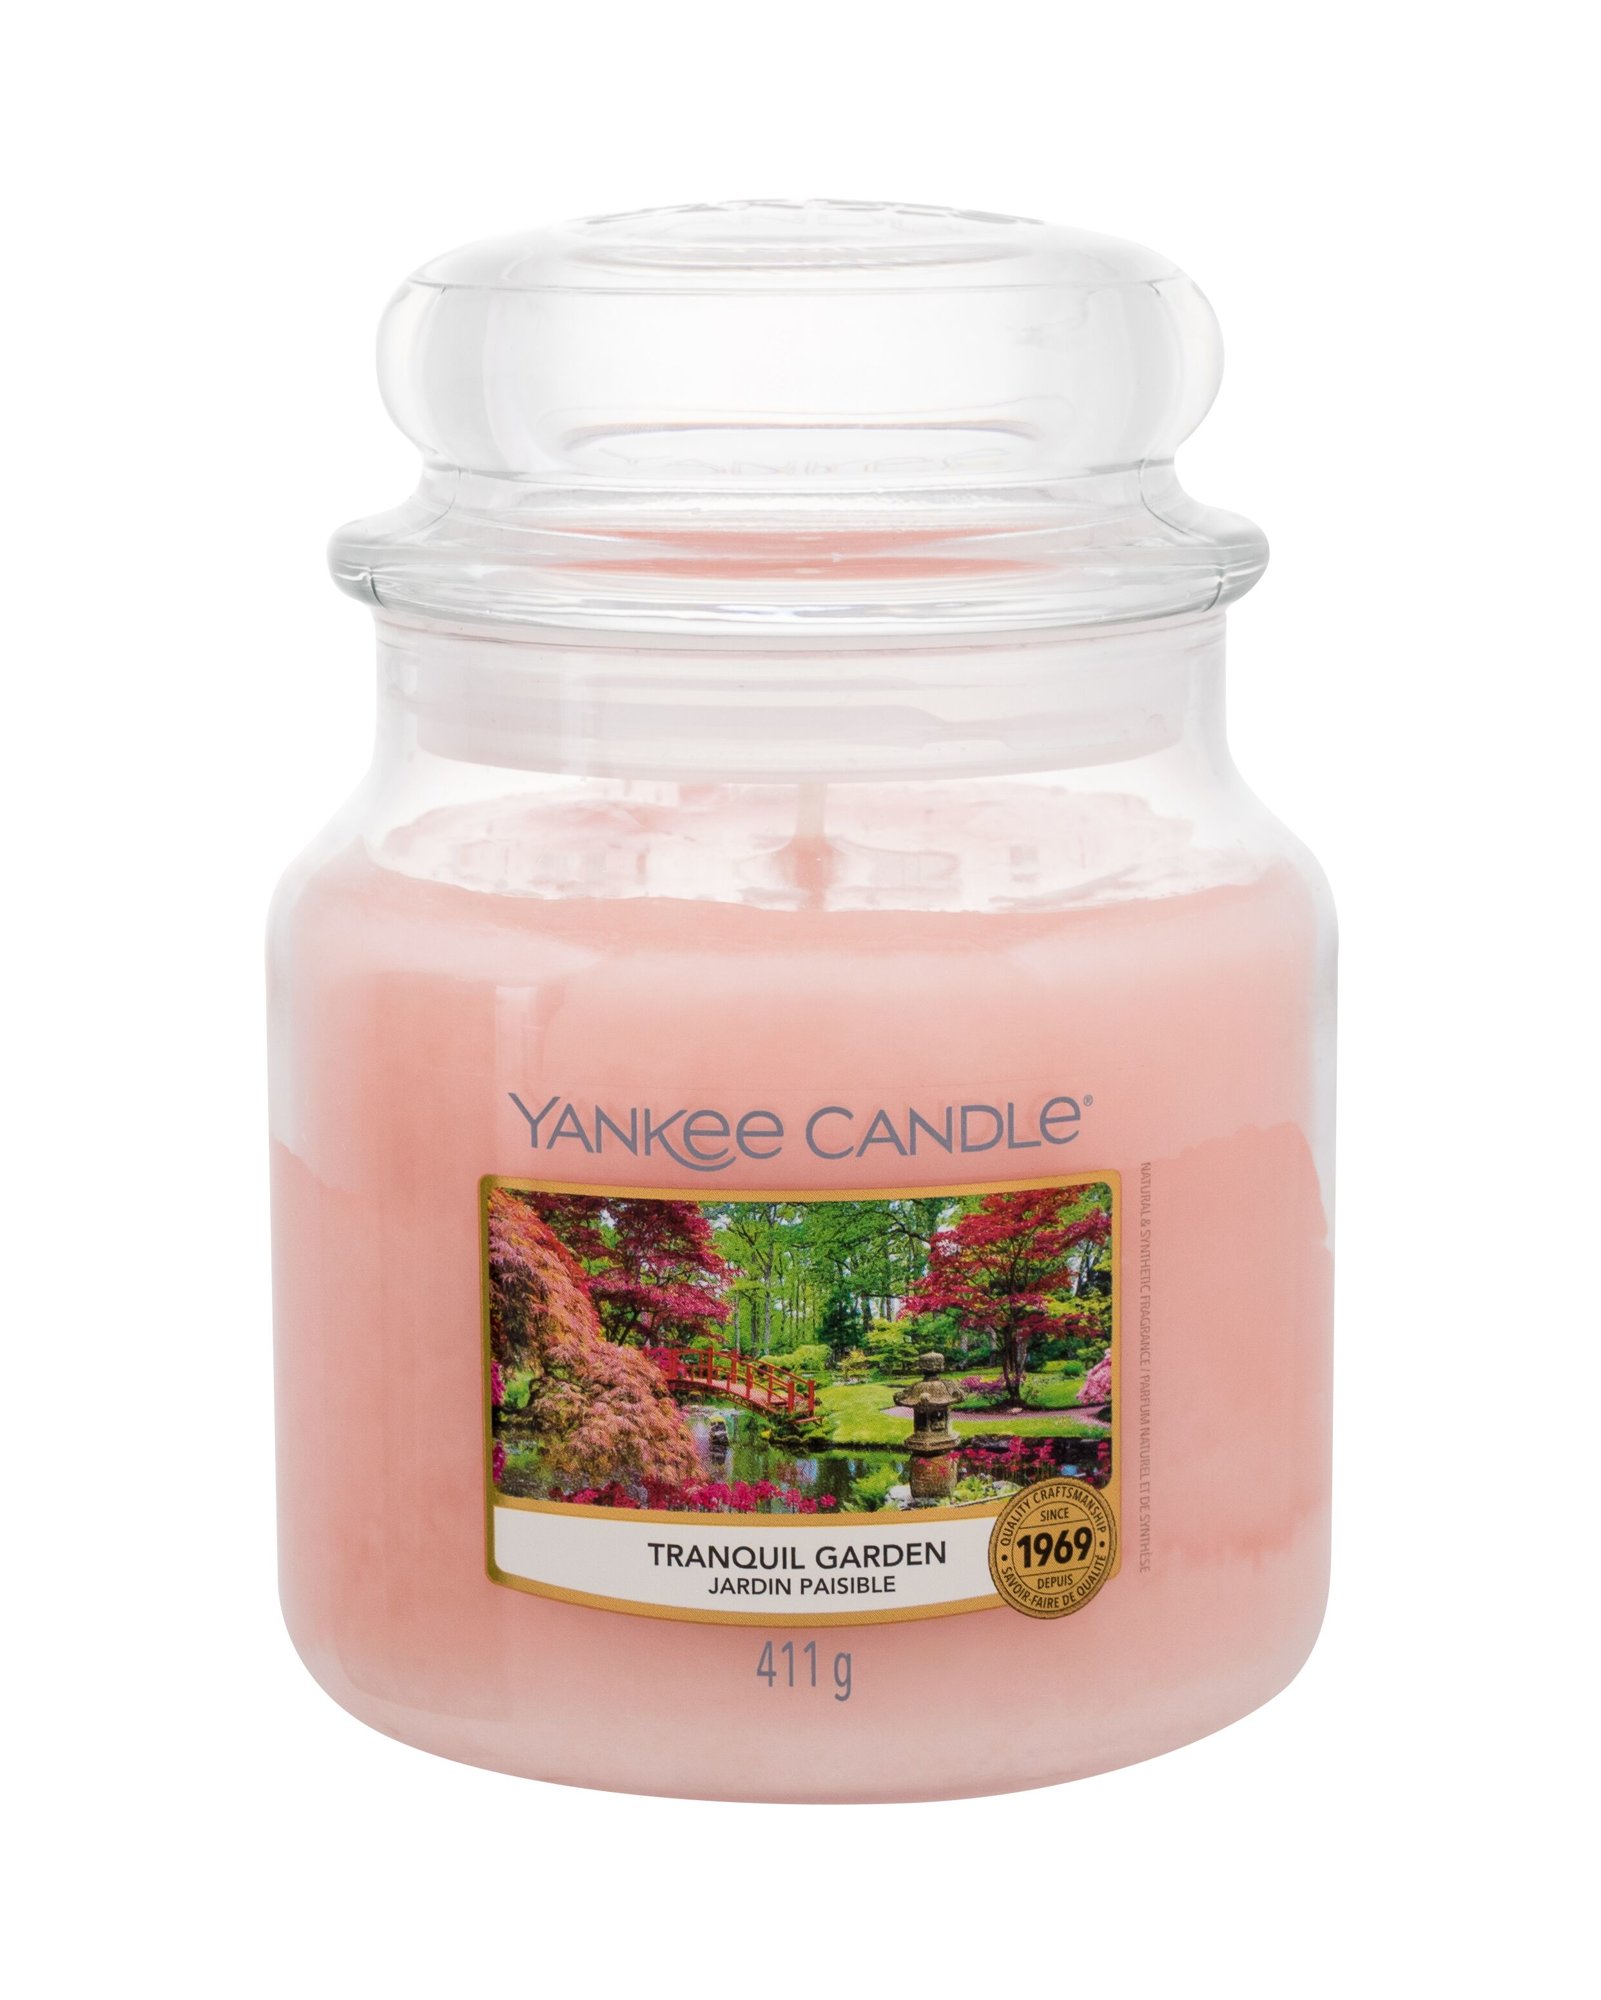 Yankee Candle Tranquil Garden 411g Kvepalai Unisex Scented Candle